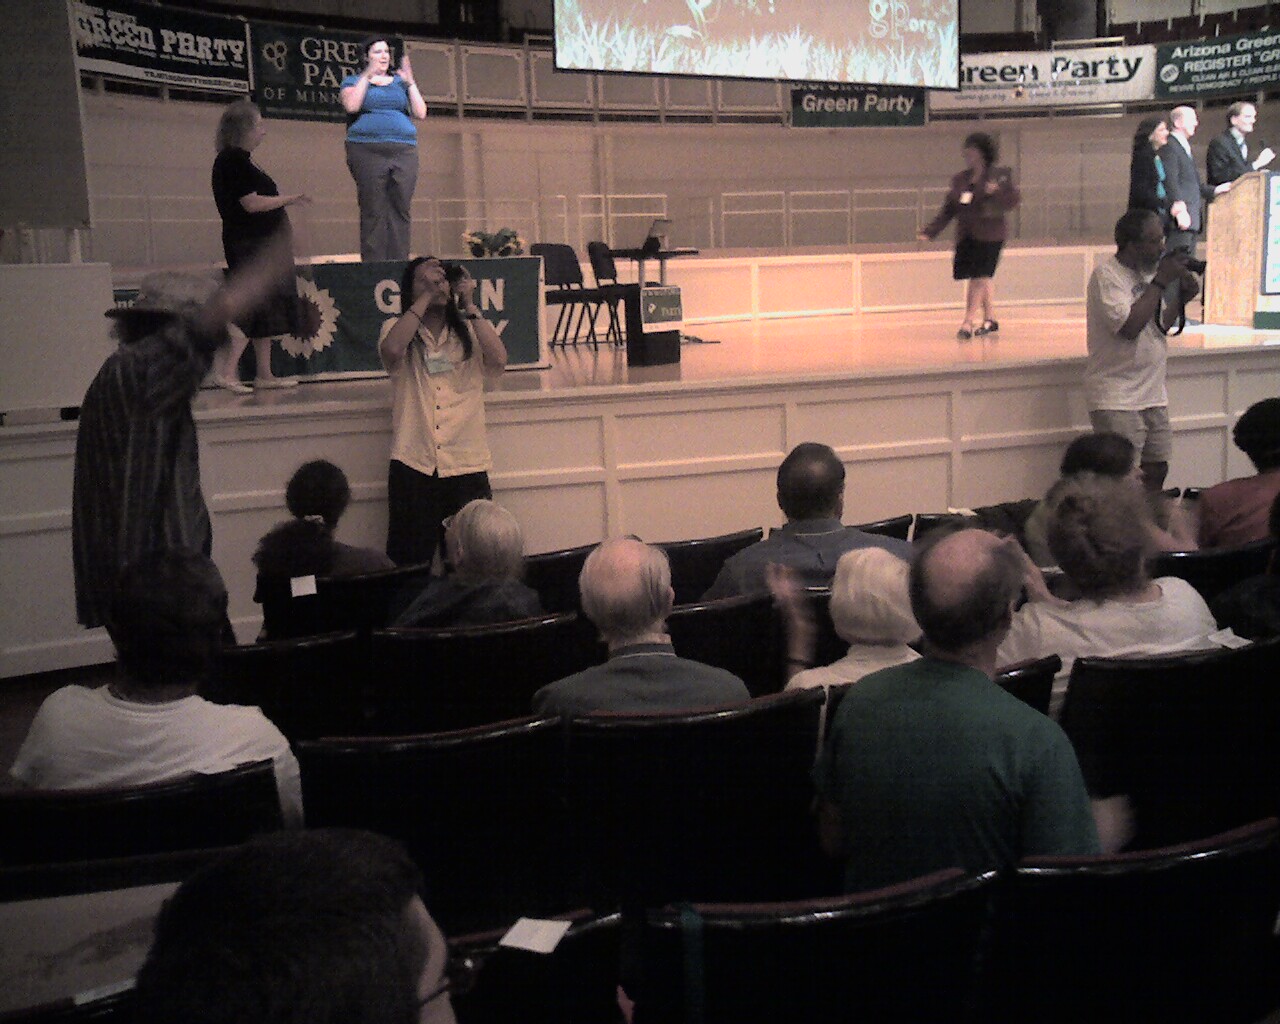 Sign Language Interpreter (in blue shirt) at 2008 Green Party Prez Convention